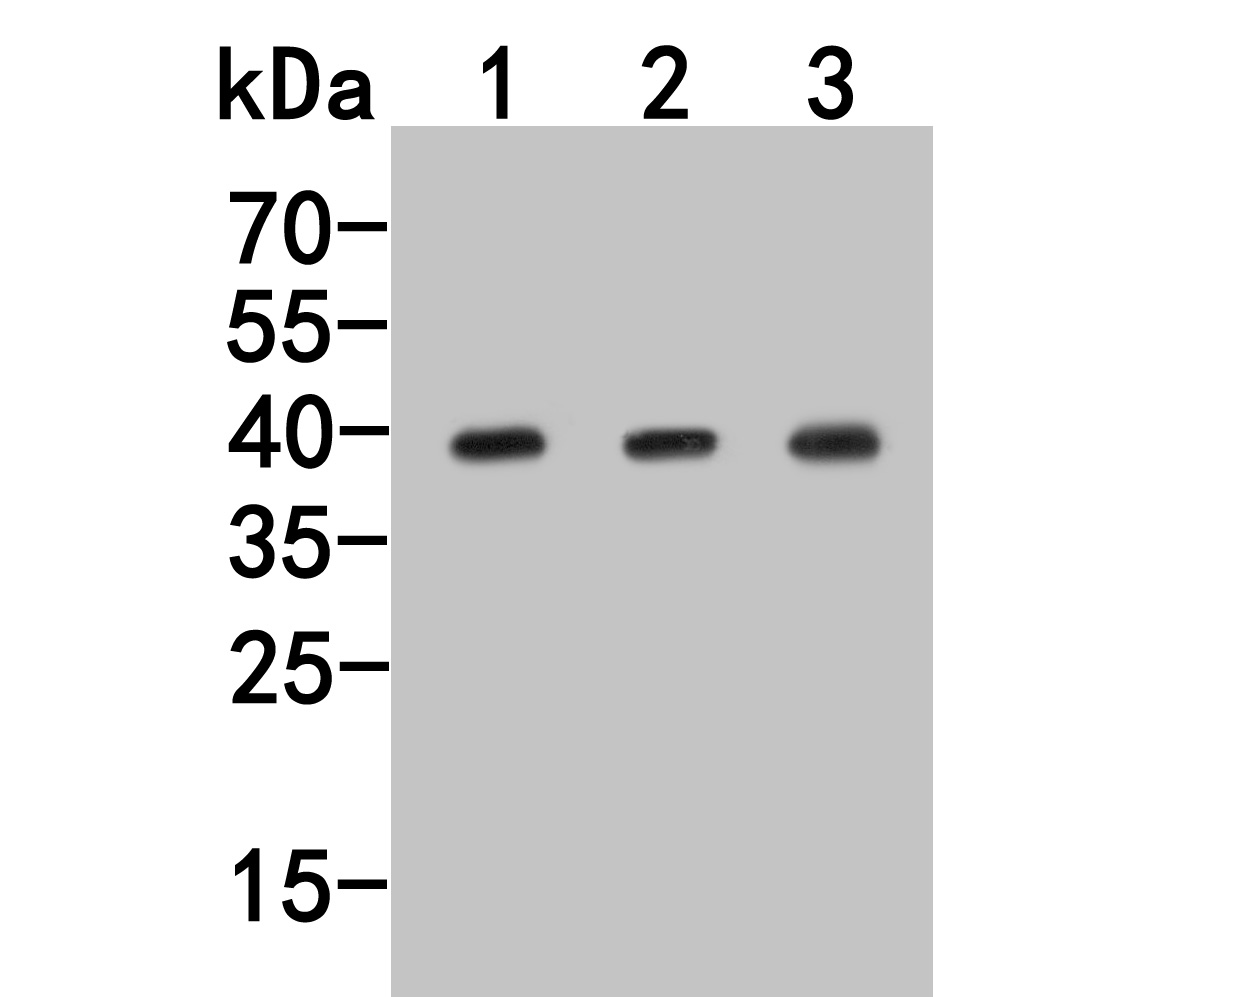 Western blot analysis of GNAI2 on different lysates. Proteins were transferred to a PVDF membrane and blocked with 5% NFDM/TBST for 1 hour at room temperature. The primary antibody (HA500293, 1/1,000) was used in 5% NFDM/TBST at room temperature for 2 hours. Goat Anti-Rabbit IgG - HRP Secondary Antibody (HA1001) at 1:200,000 dilution was used for 1 hour at room temperature.<br />
Positive control: <br />
Lane 1: 293 cell lysate<br />
Lane 2: MCF-7 cell lysate<br />
Lane 3: Mouse hippocampus tissue lysate